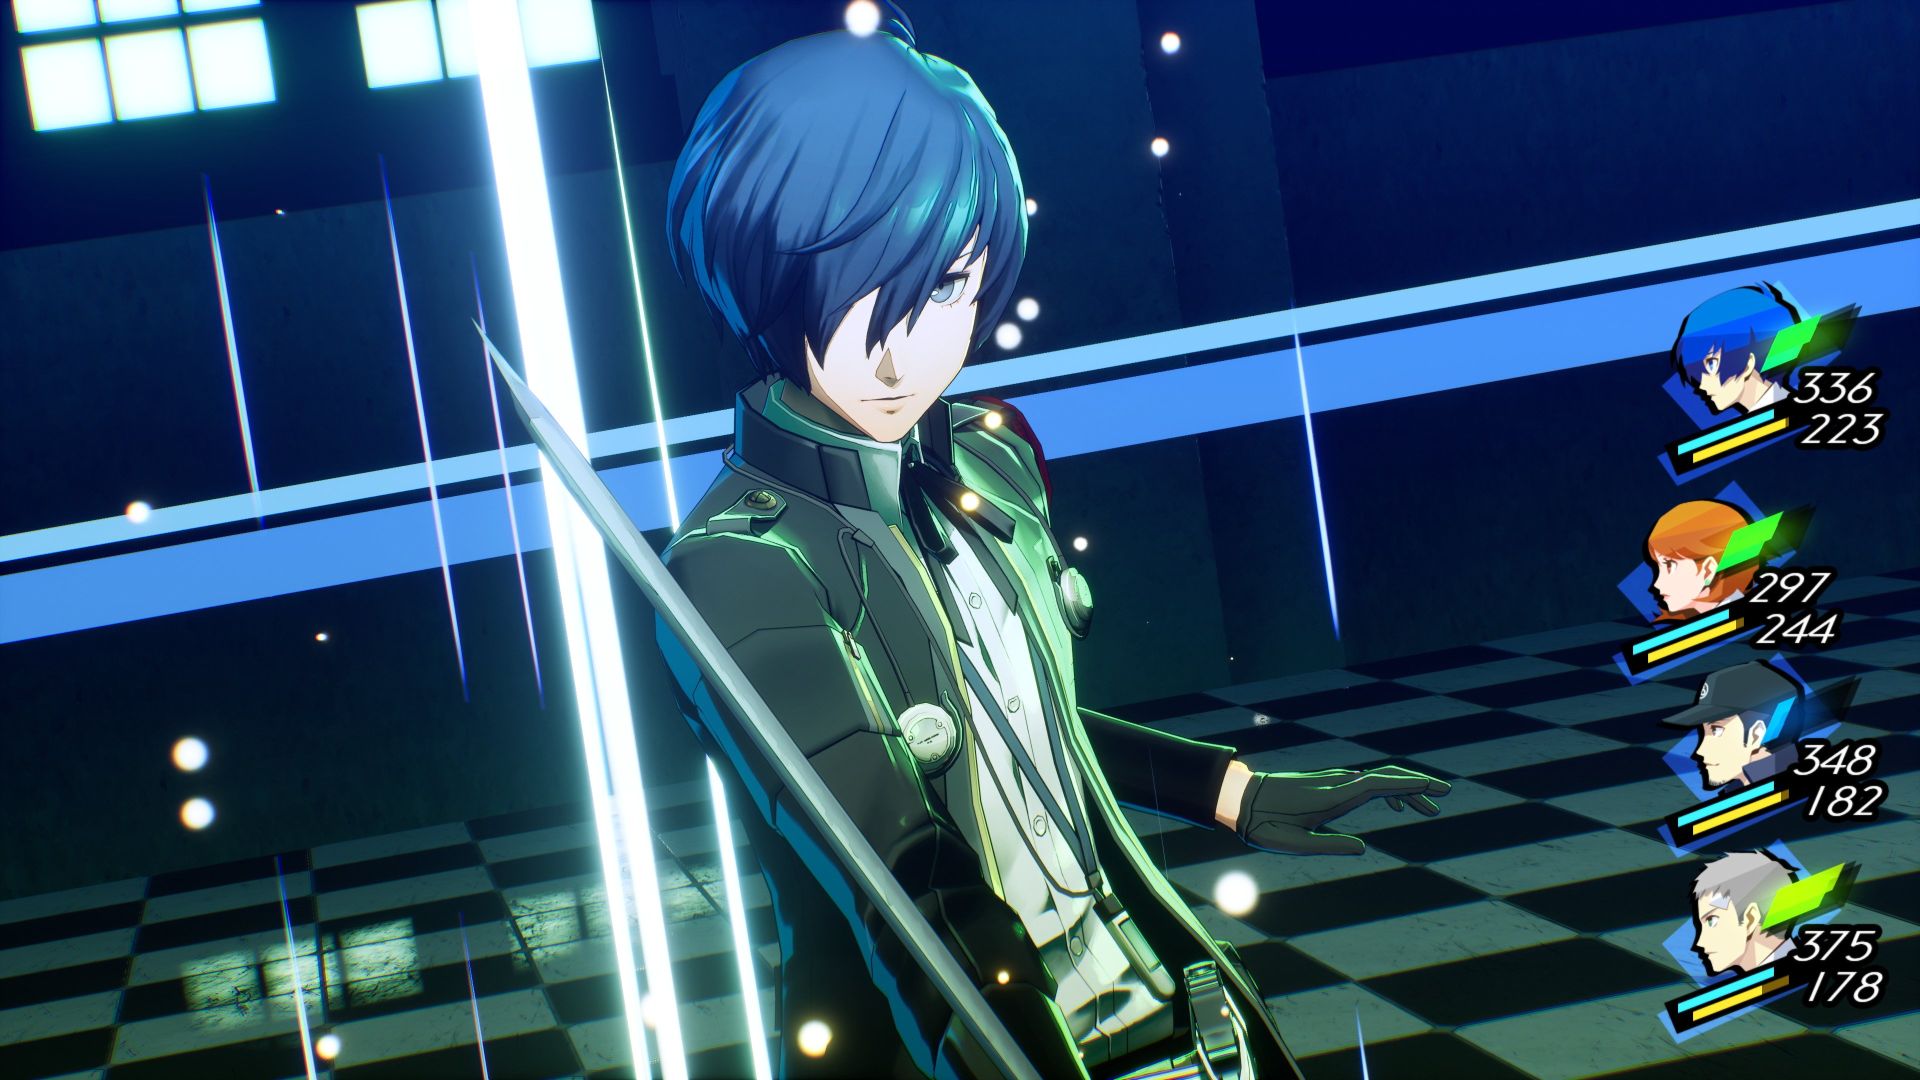 Persona 3 Reload Won’t Get an Updated Re-Release like Persona 5 Royal Any Time Soon – Atlus